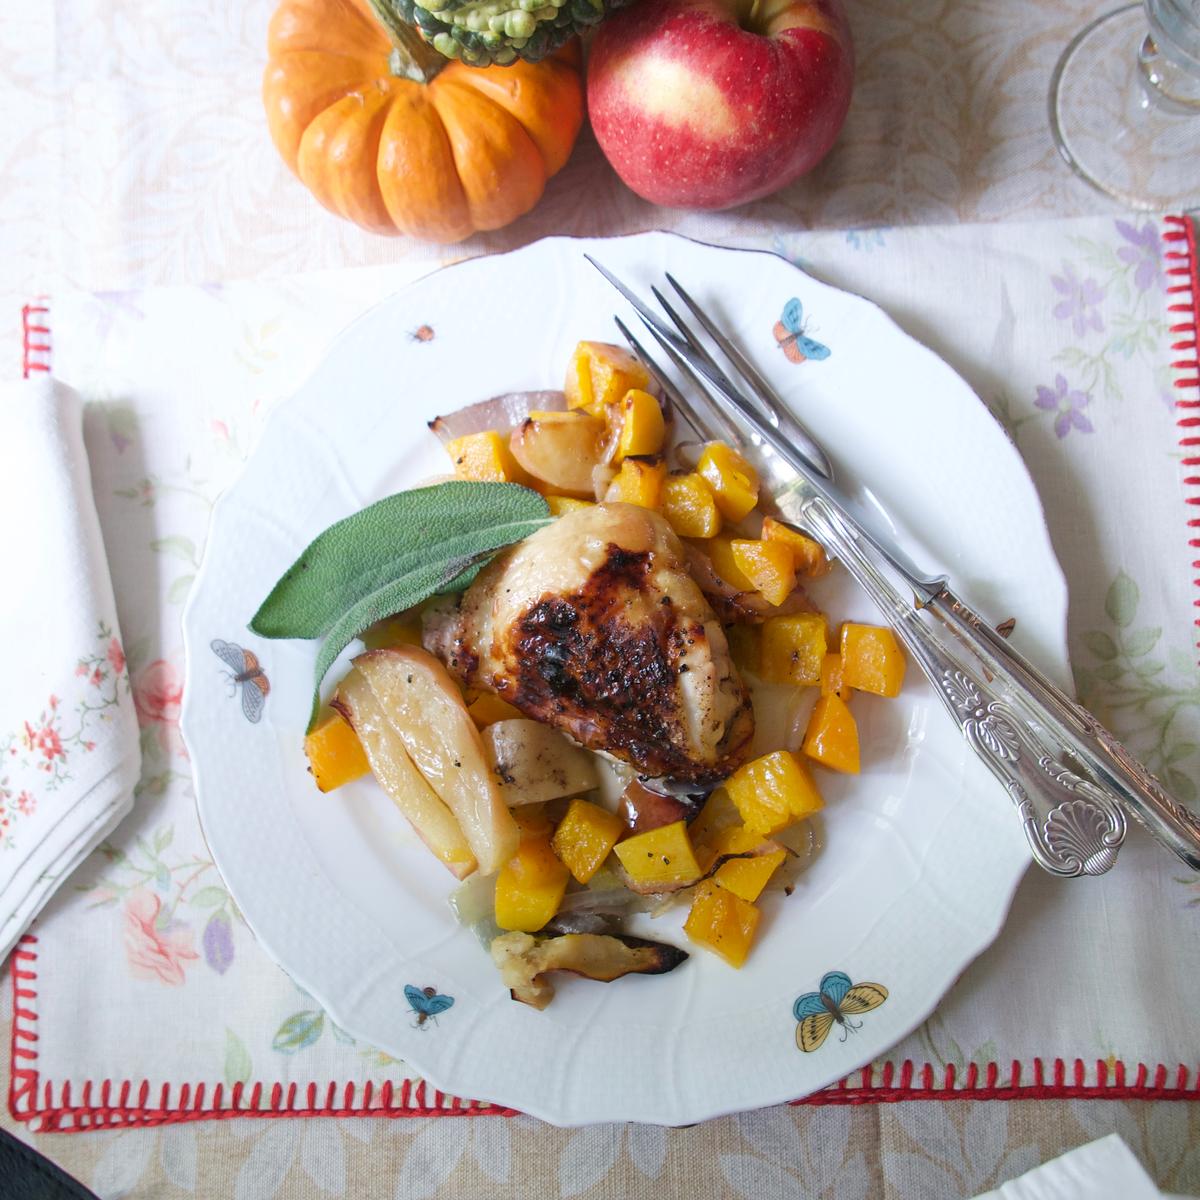 As the chicken thighs roast, they release their juices and fat to mingle with the caramelizing squash and apples on the same pan. (Victoria de la Maza)